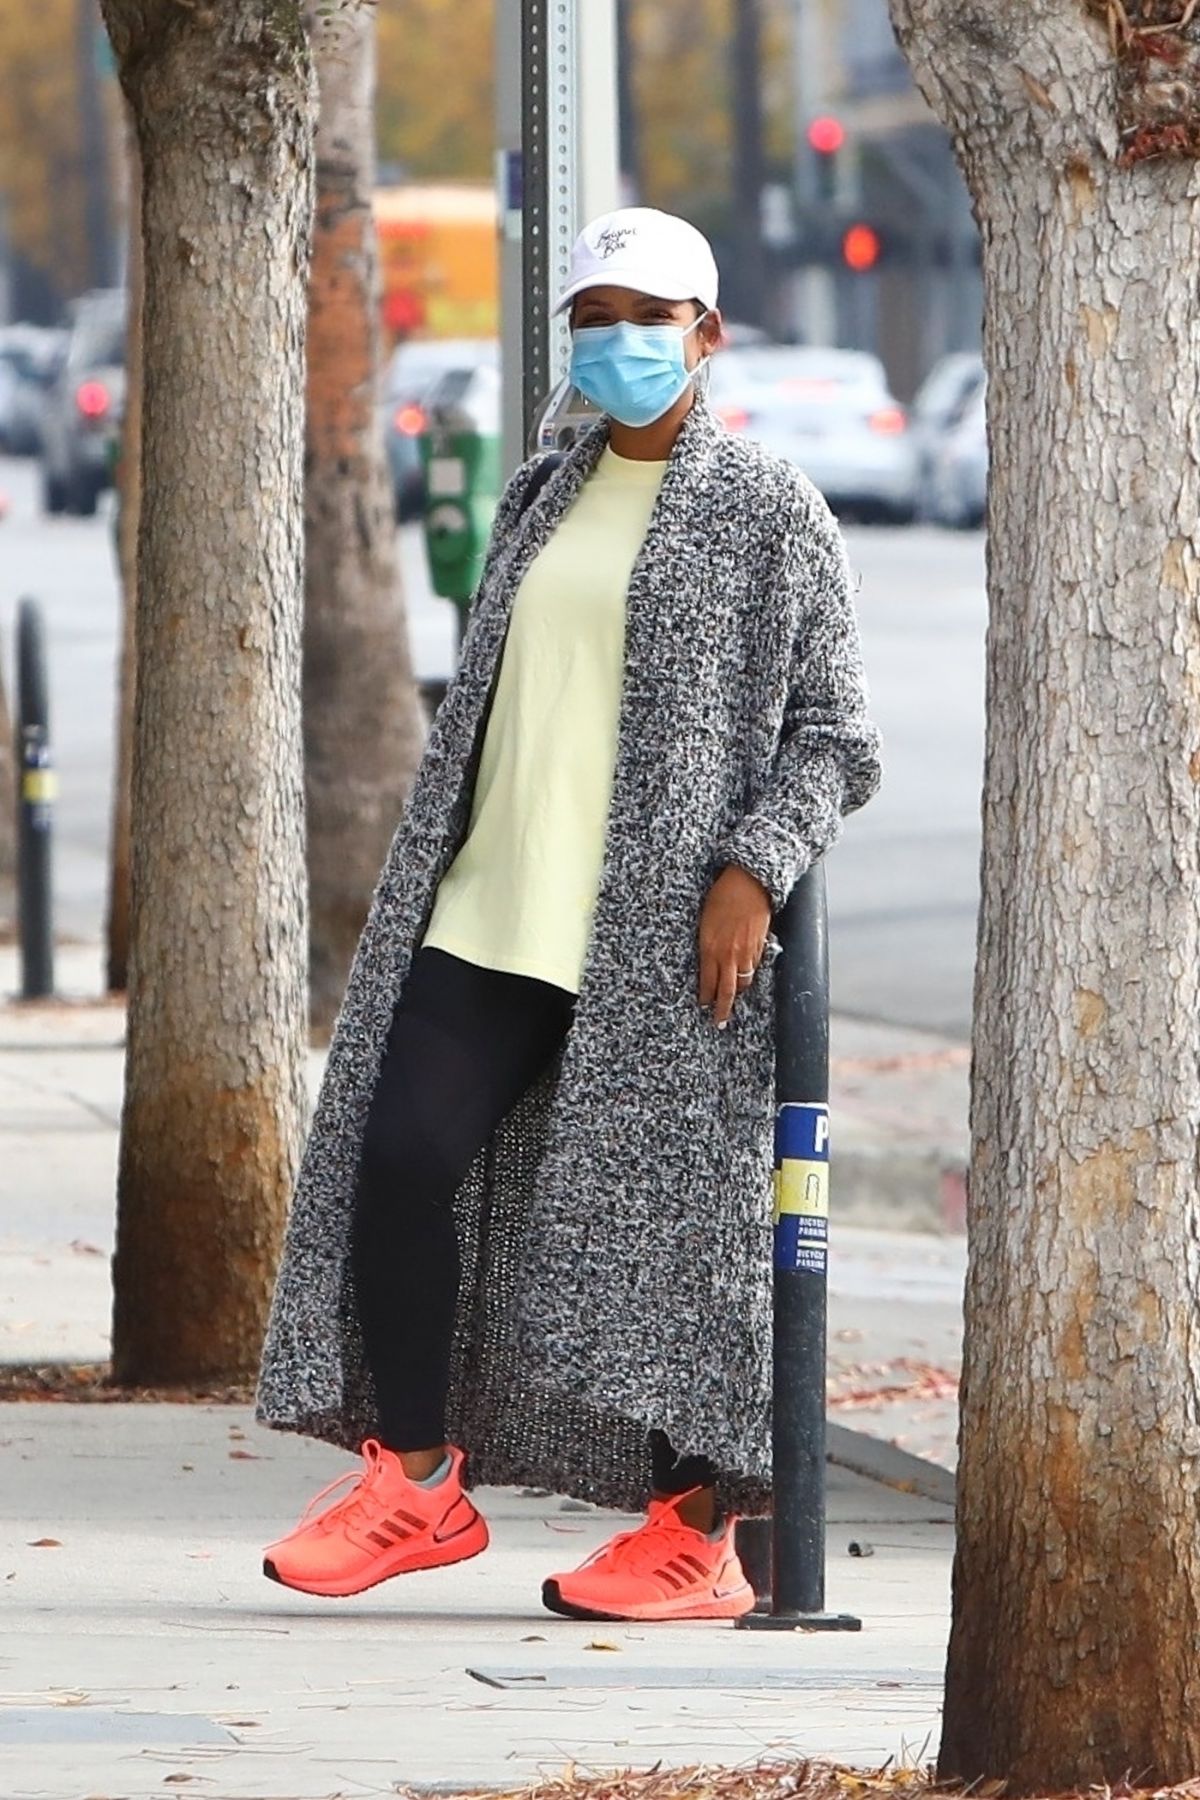 christina-milian-out-and-about-los-angeles-12-11-2020-1.jpg